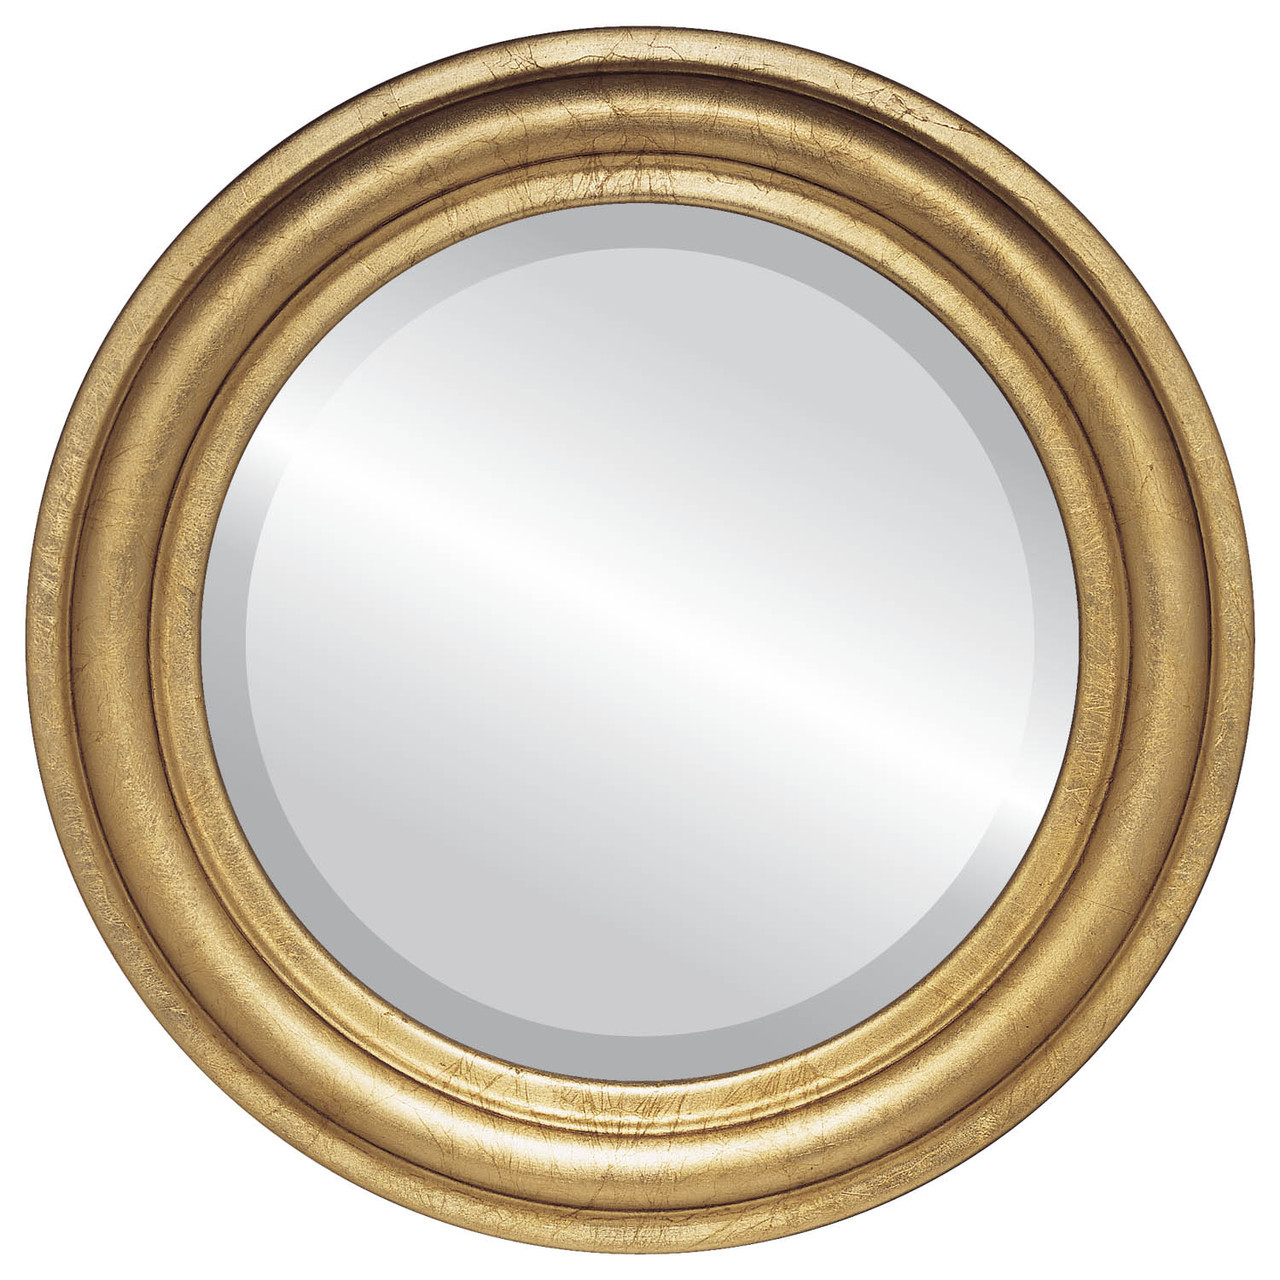 Contemporary Gold Round Mirrors from $142 Free Shipping